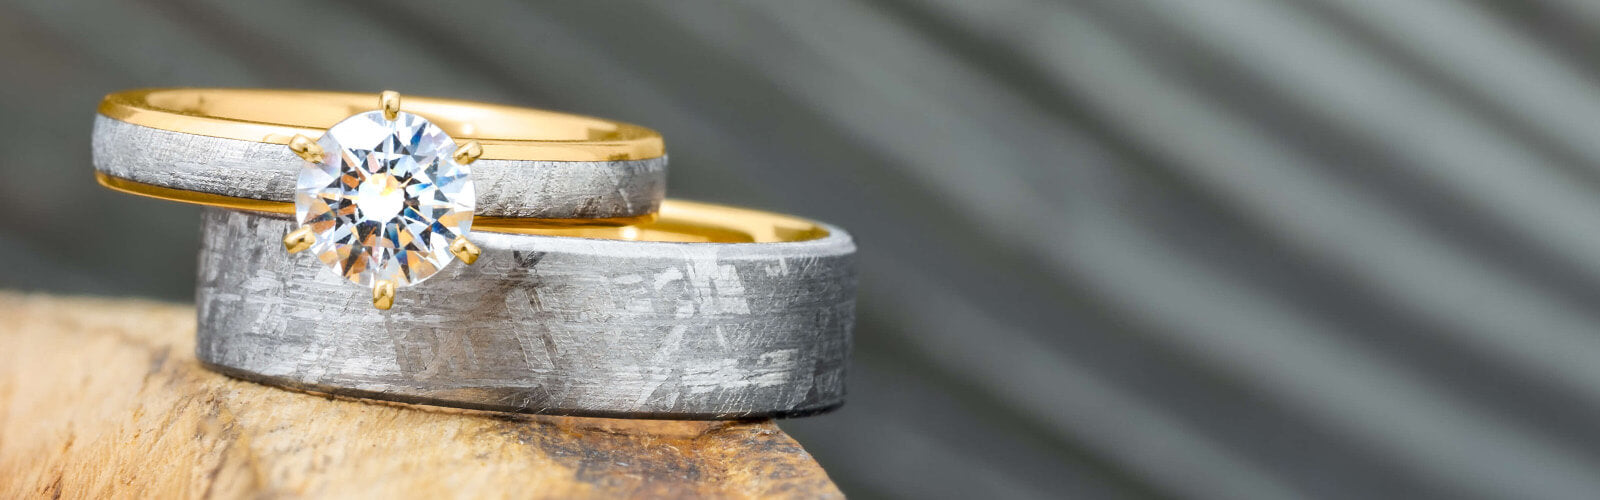 Solid Gold Rings with Meteorite